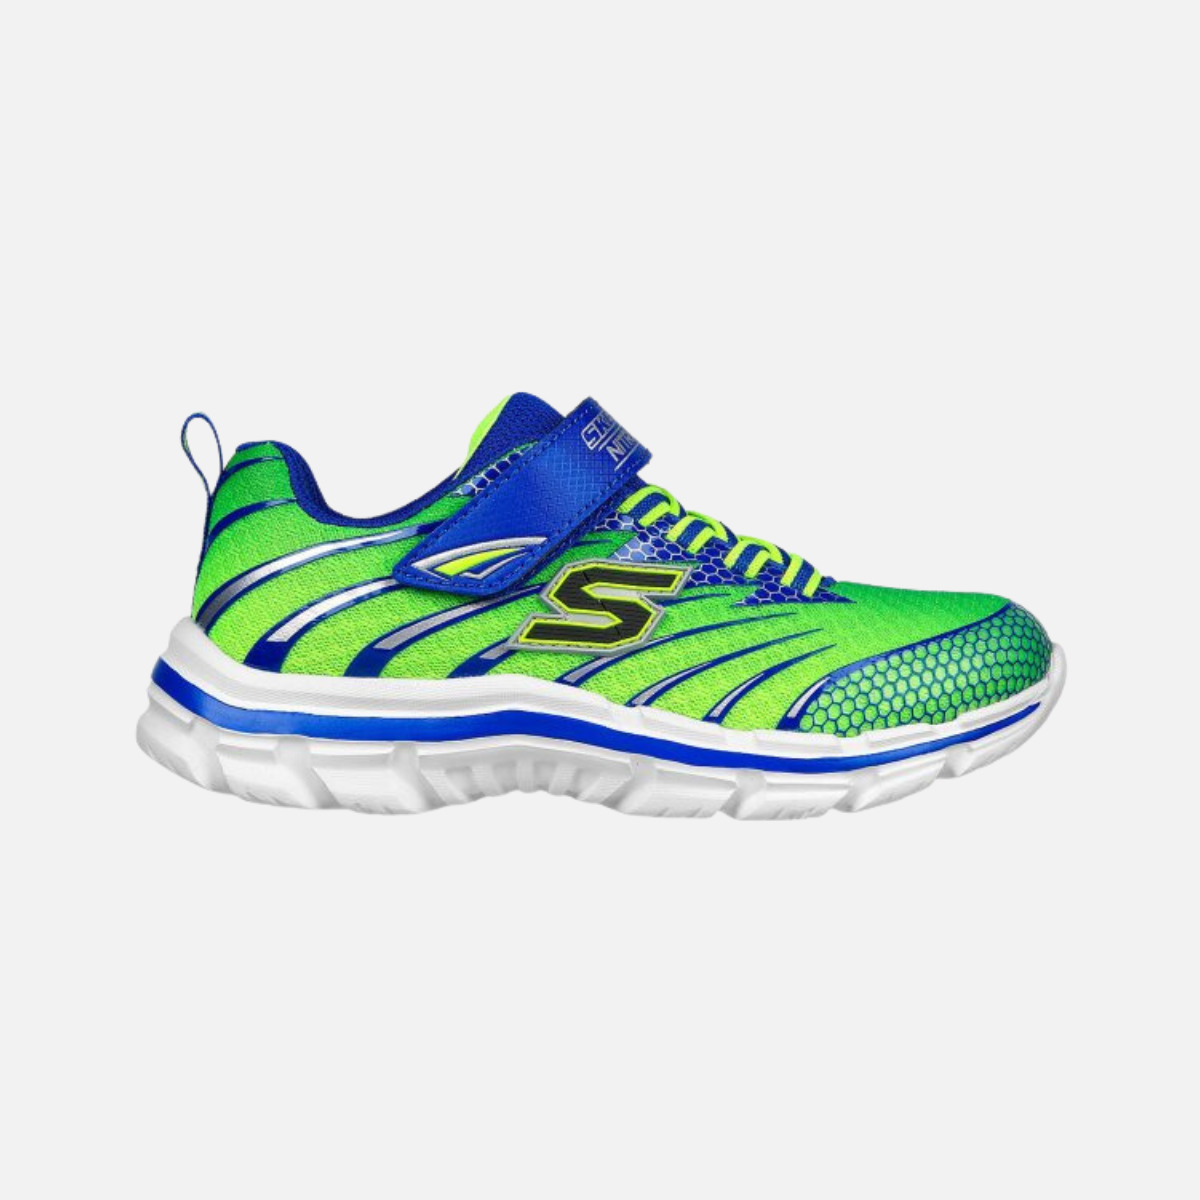 Skechers Nitrate-Zulvox Kids Shoes (5-9 YEAR) -Lime/Blue